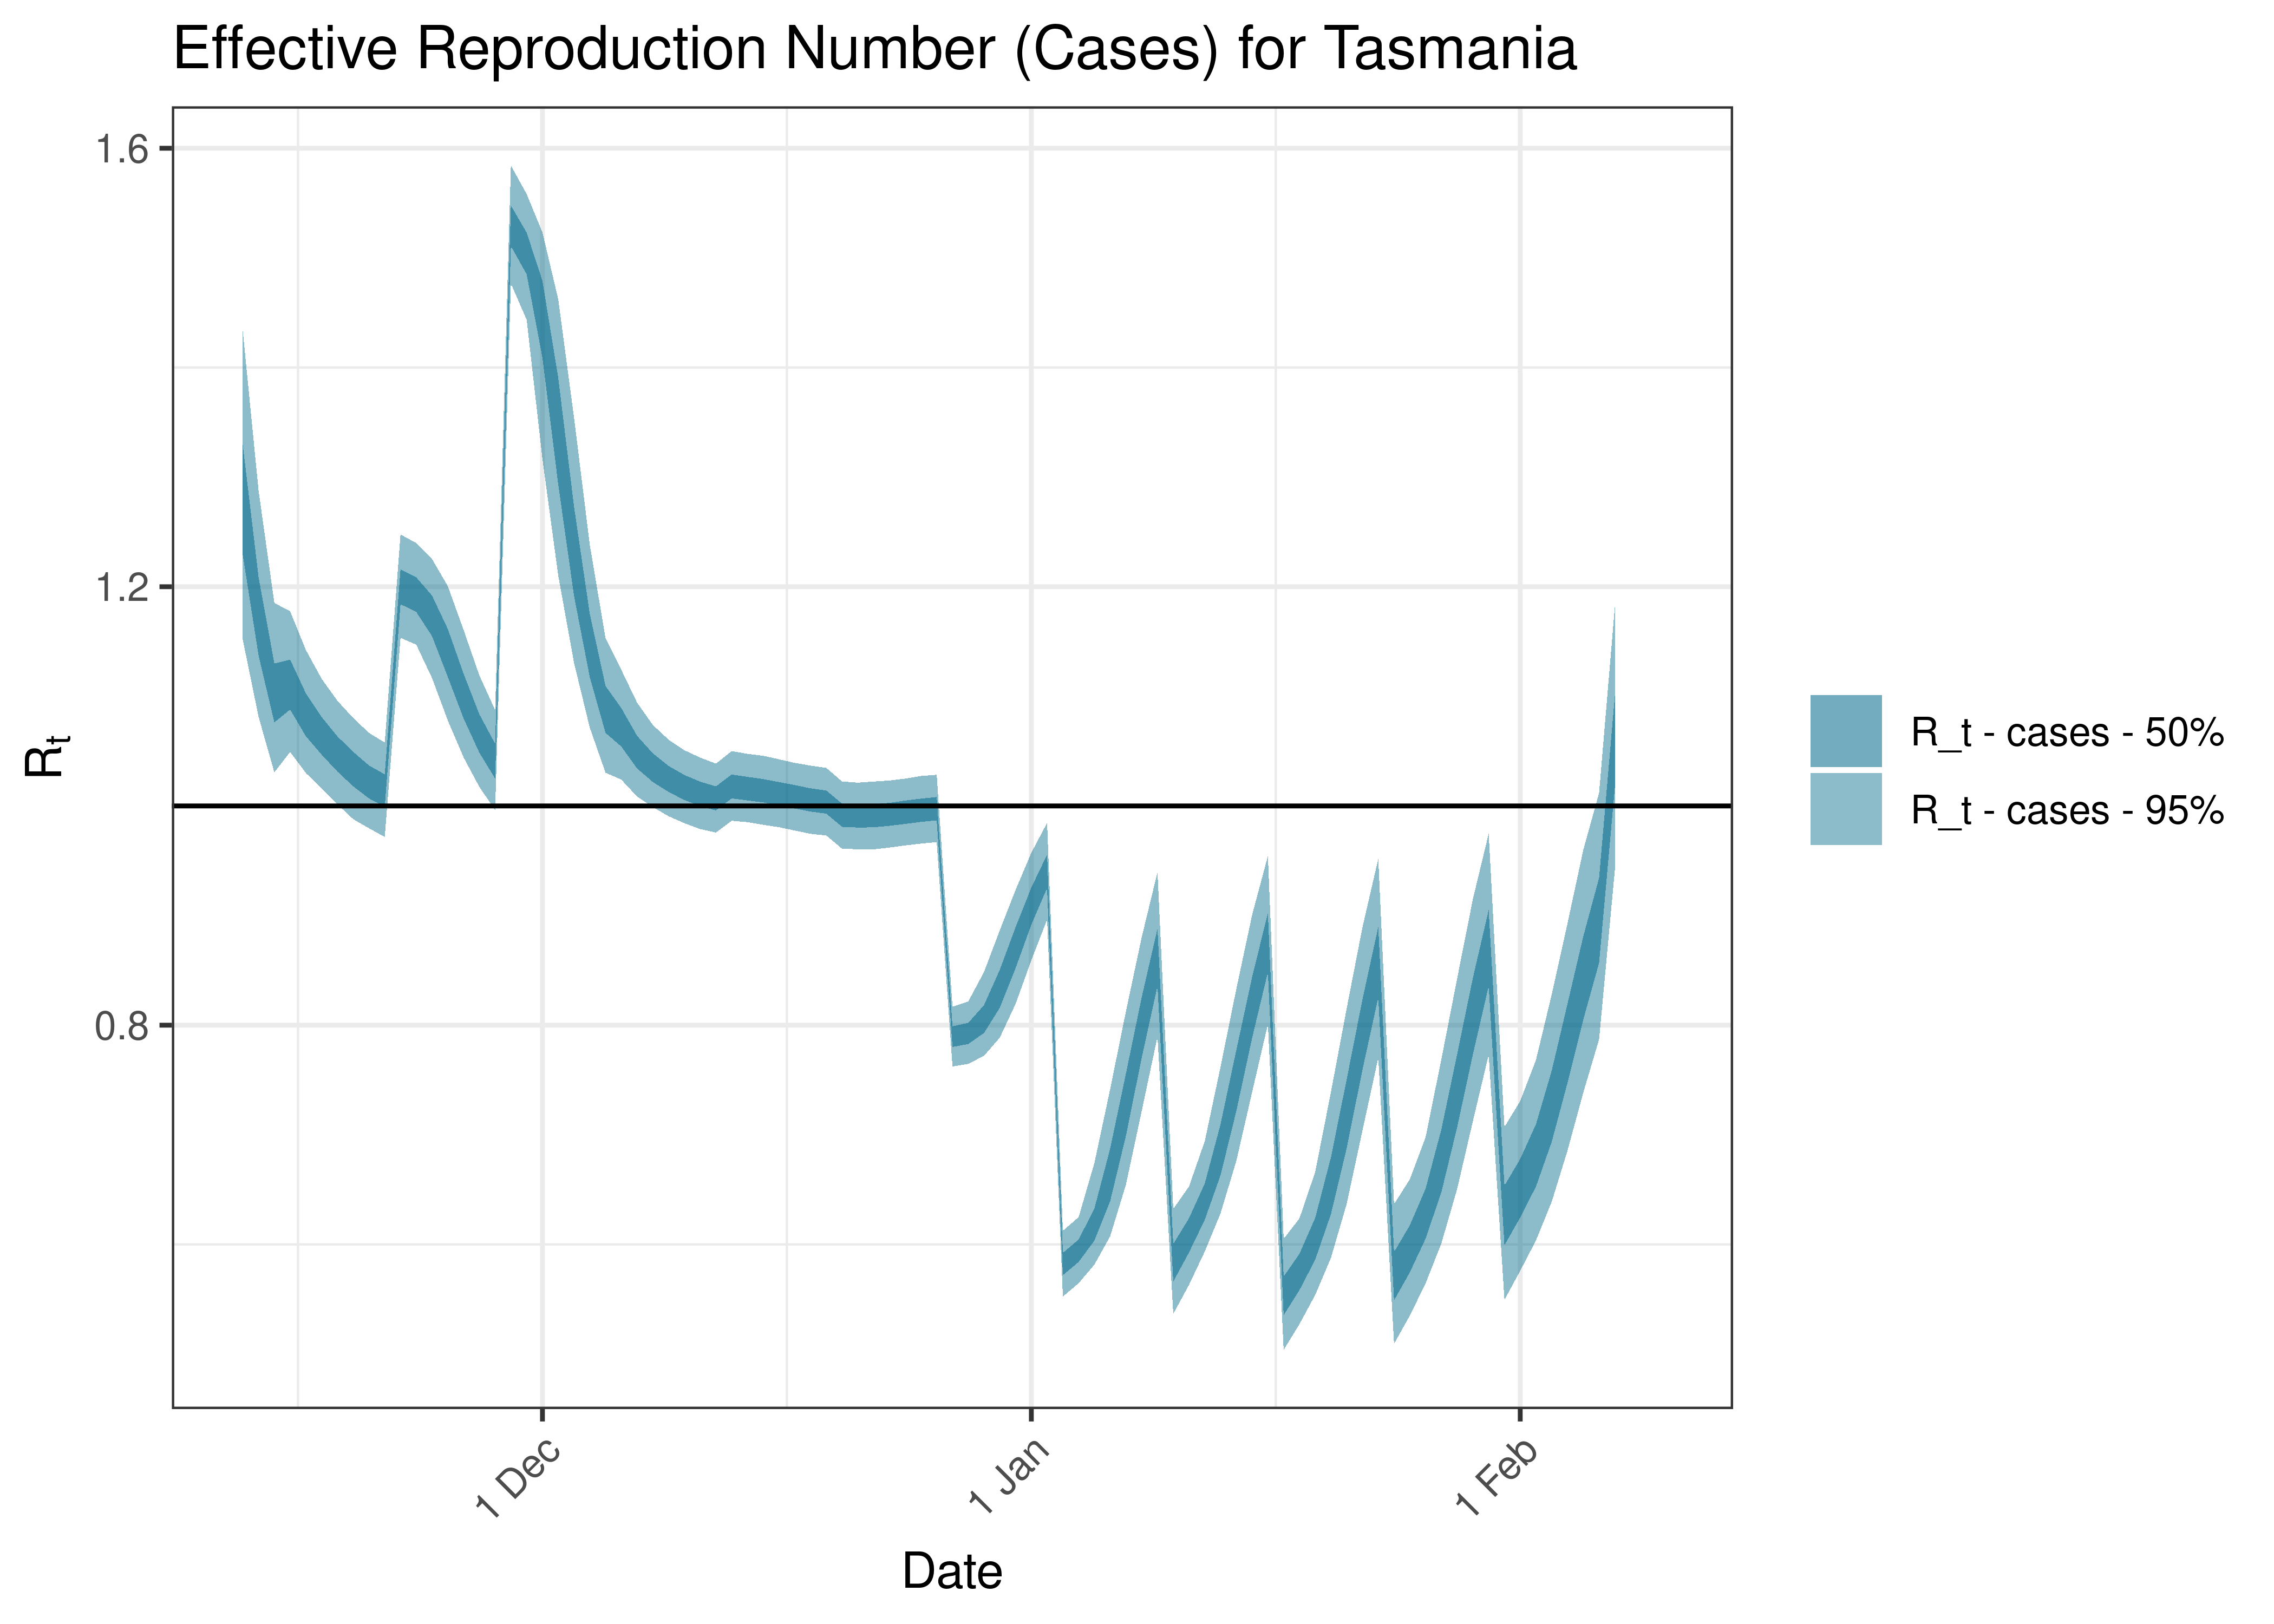 Estimated Effective Reproduction Number Based on Cases for Tasmania over last 90 days